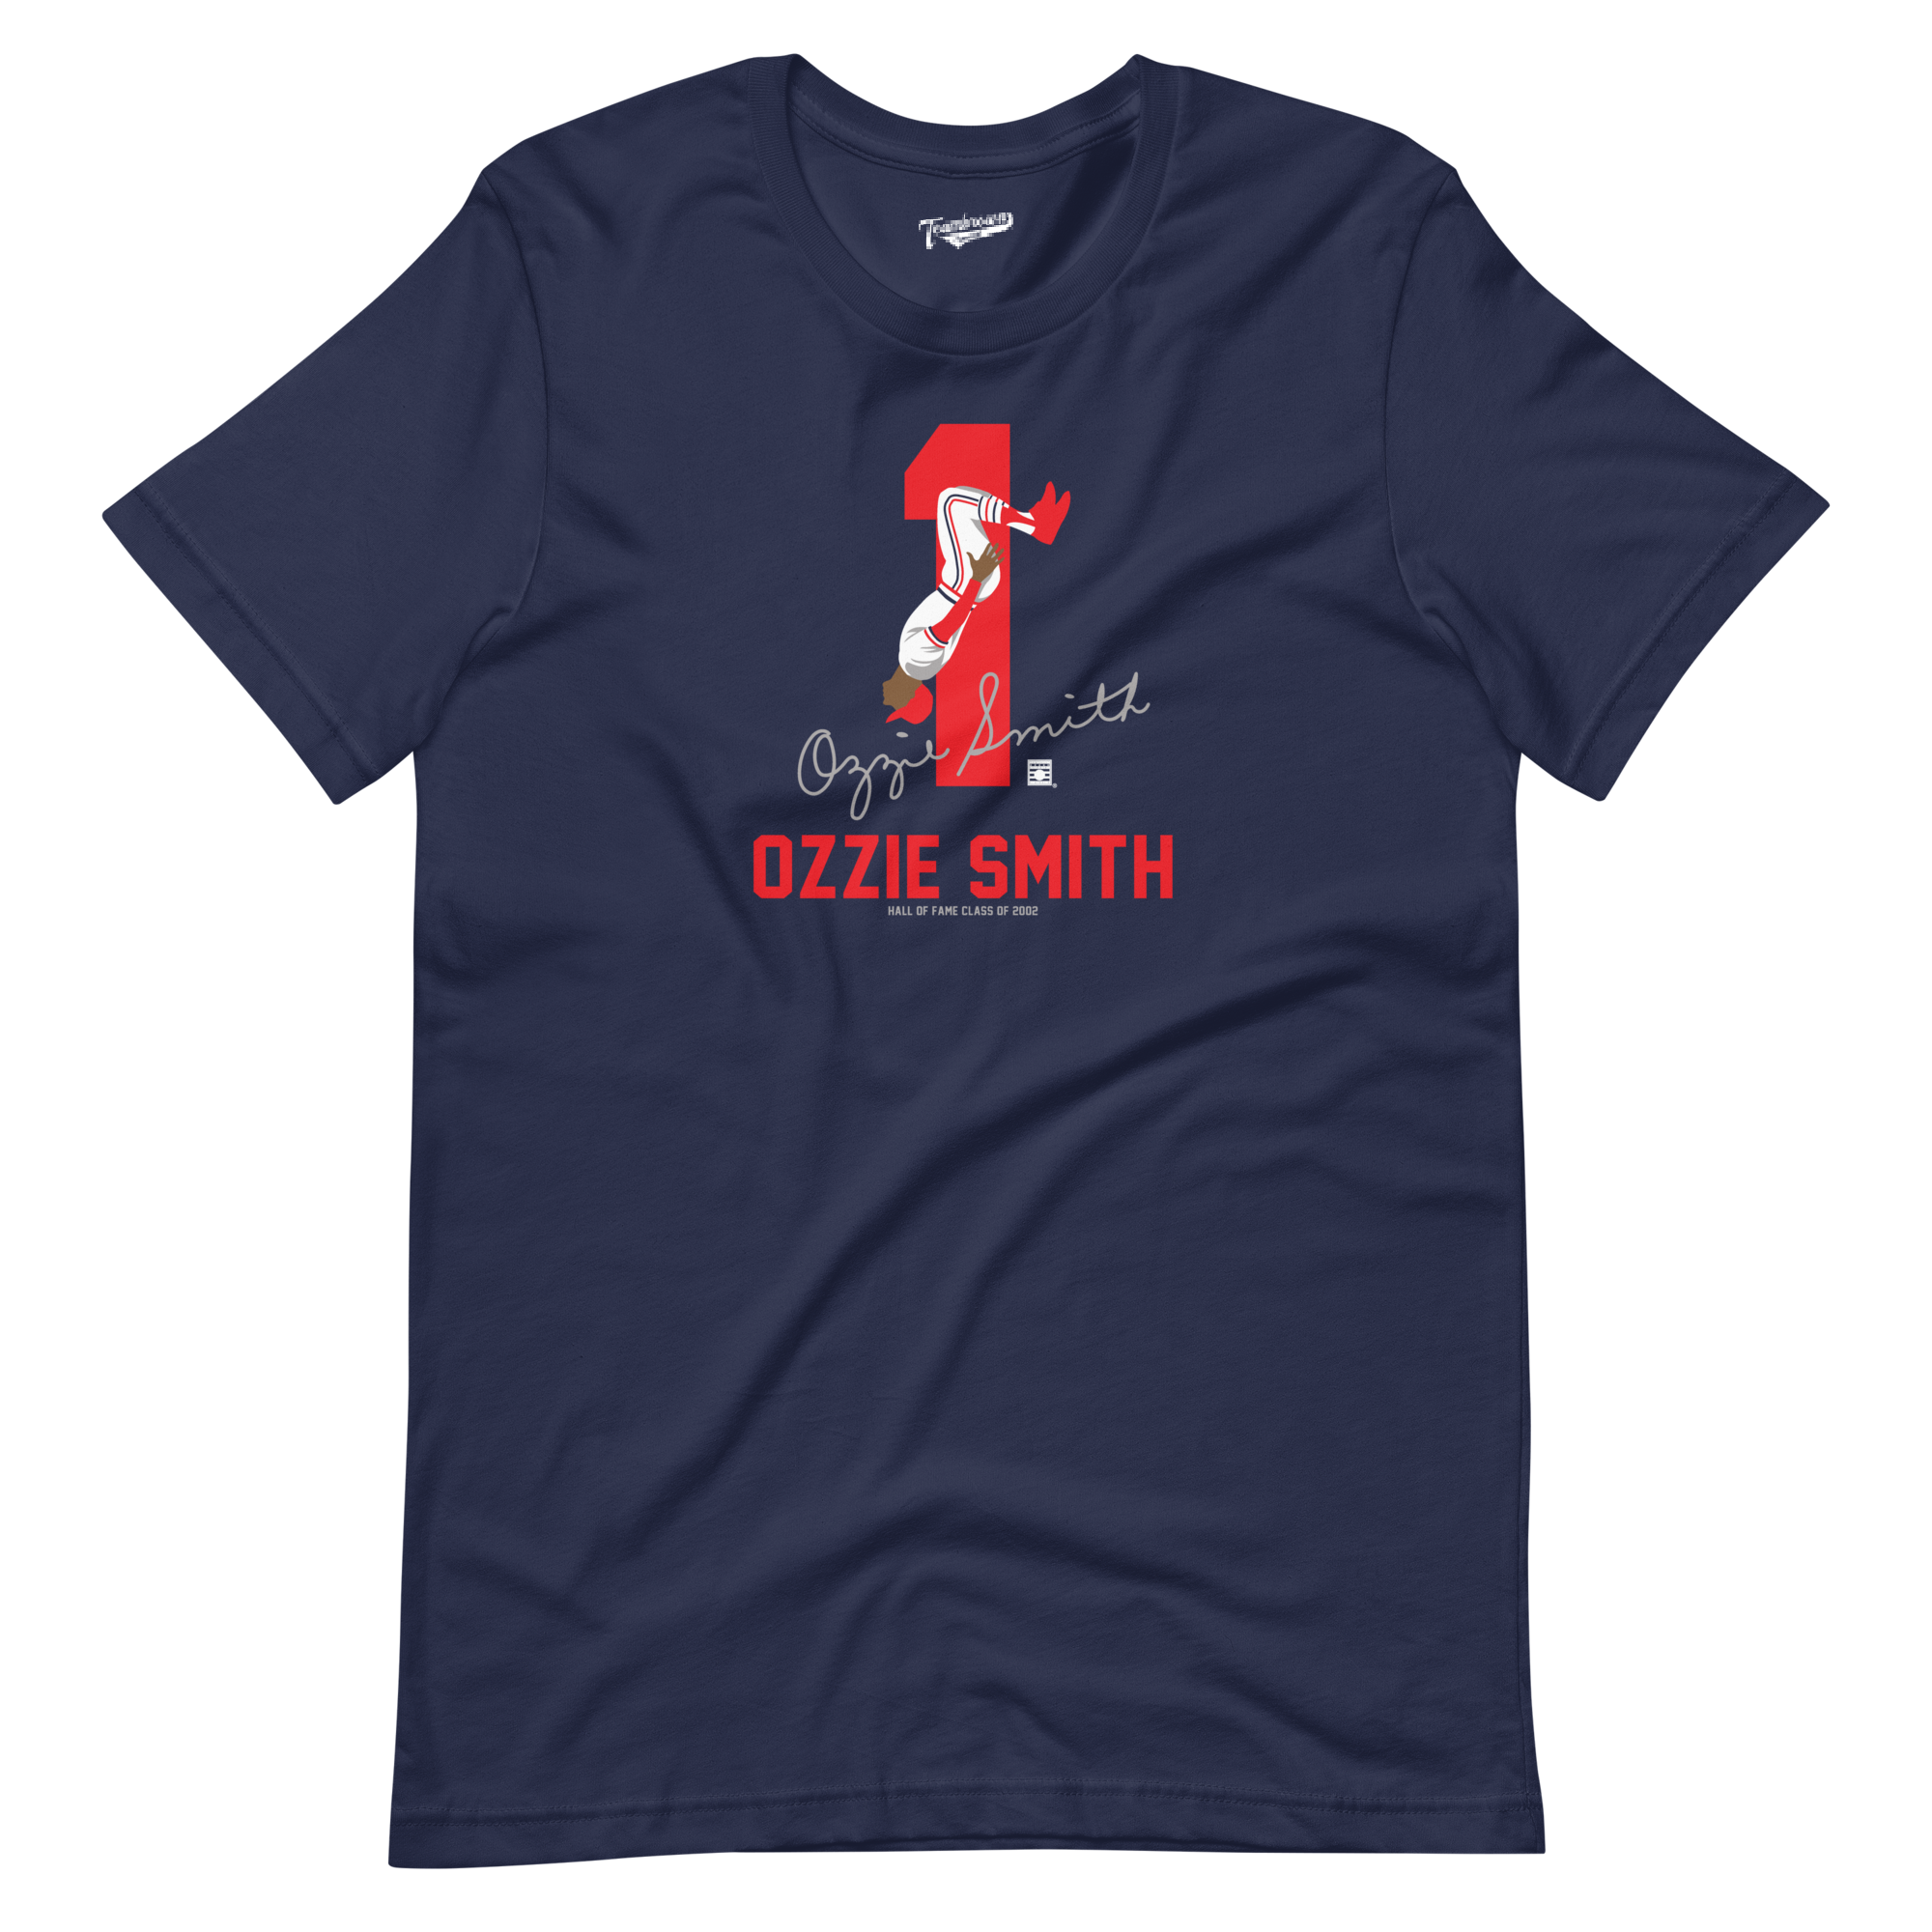 The Wizard (Ozzie Smith) St. Louis Cardinals - Officially Licensed M